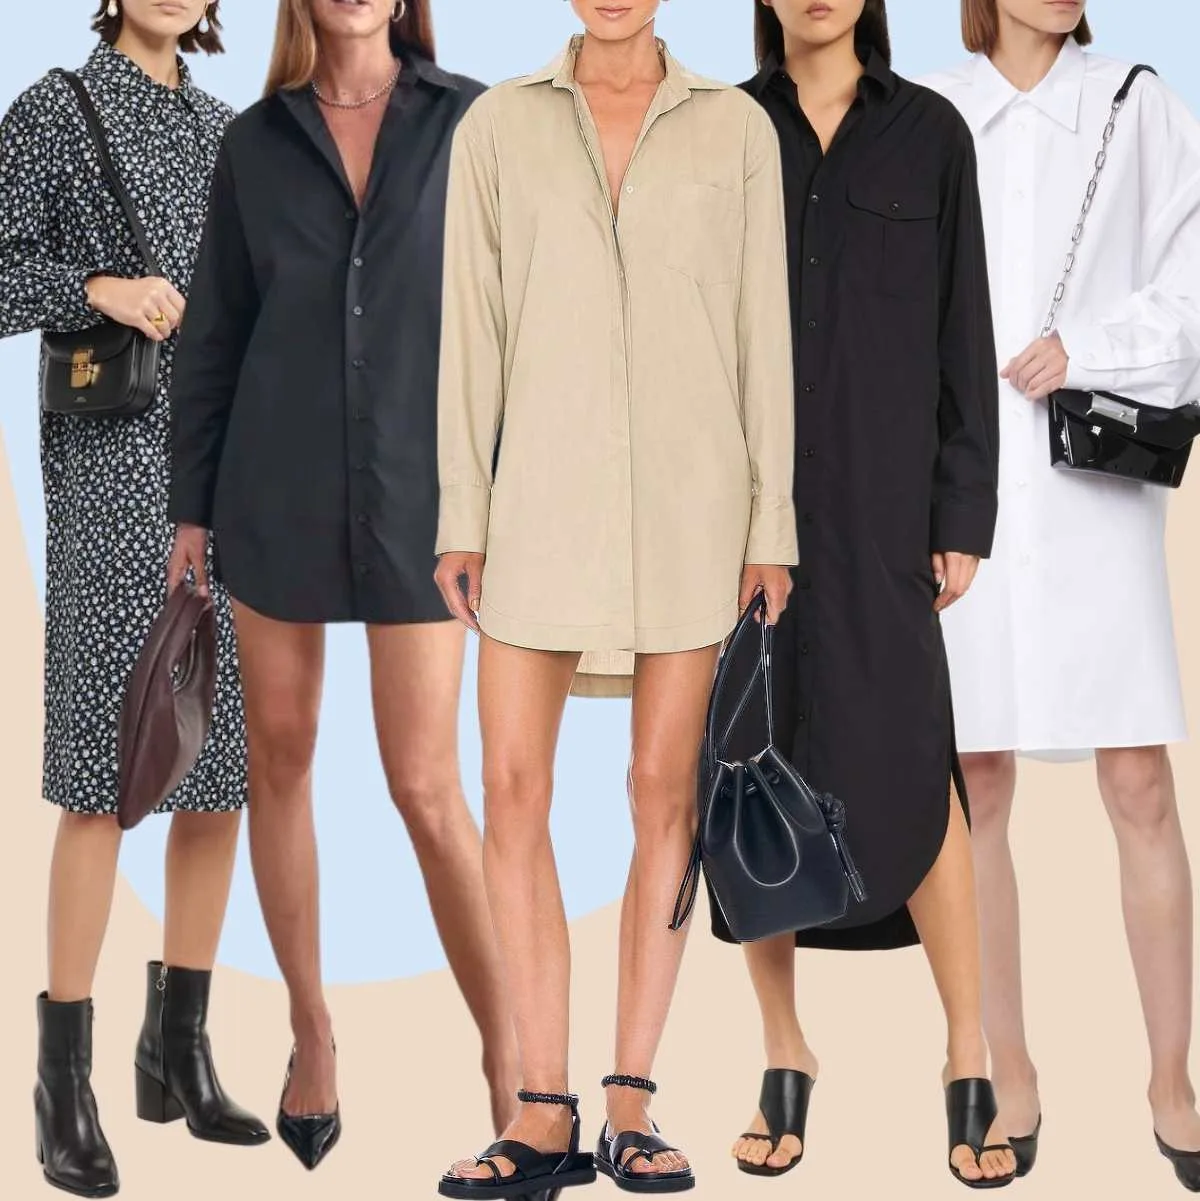 Top Stylists Take on How to Style a Shirt Dress | Casually and Formally